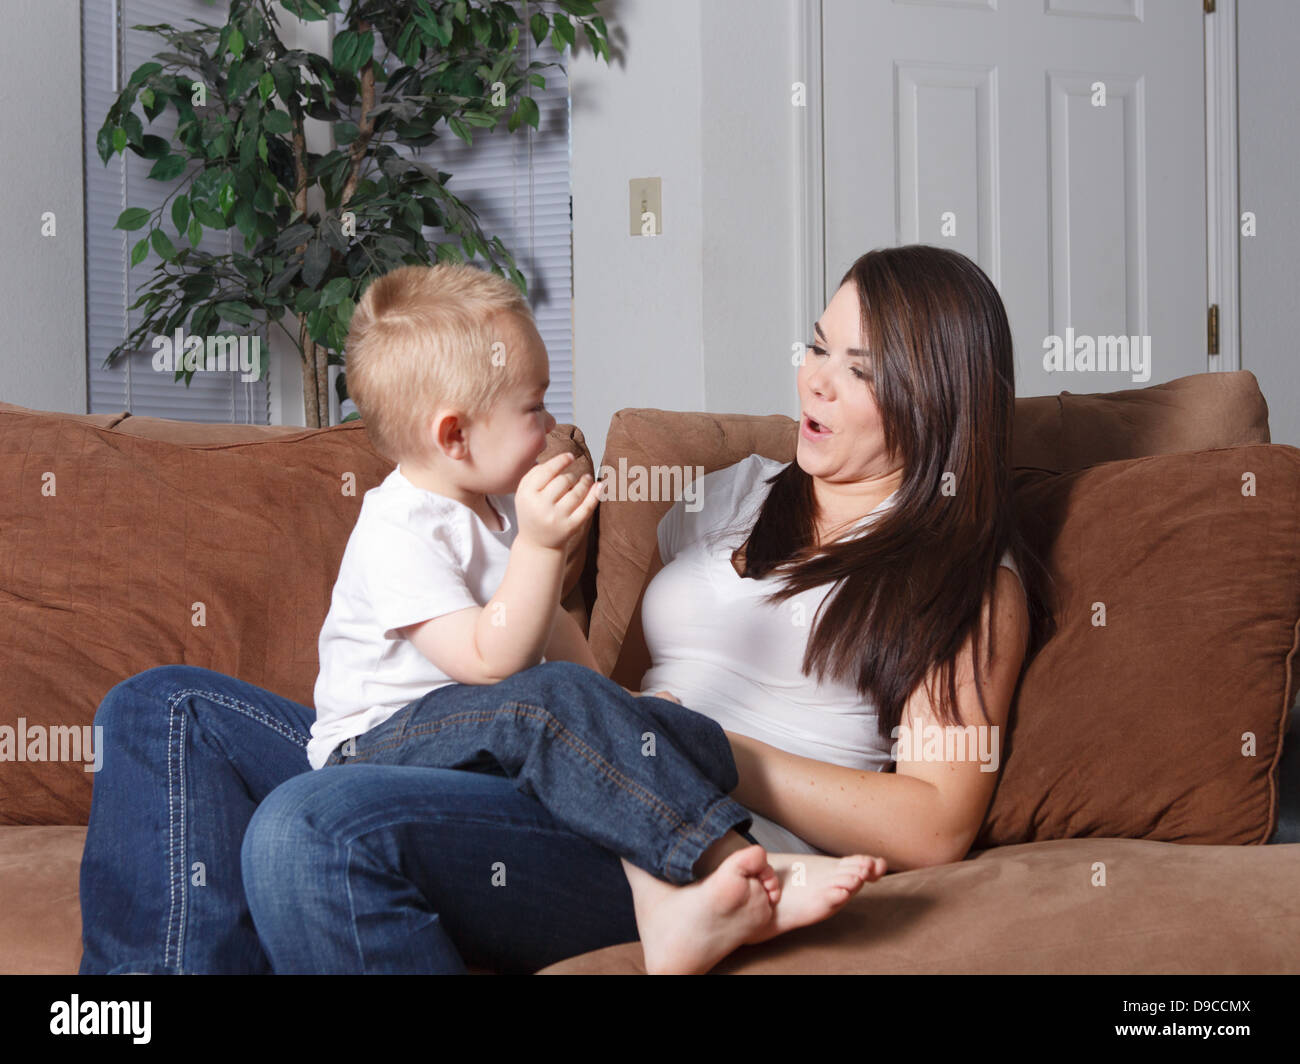 Mother and her young son sitting on the couch together at home in lifestyle setting casually playing together loving and bonding Stock Photo